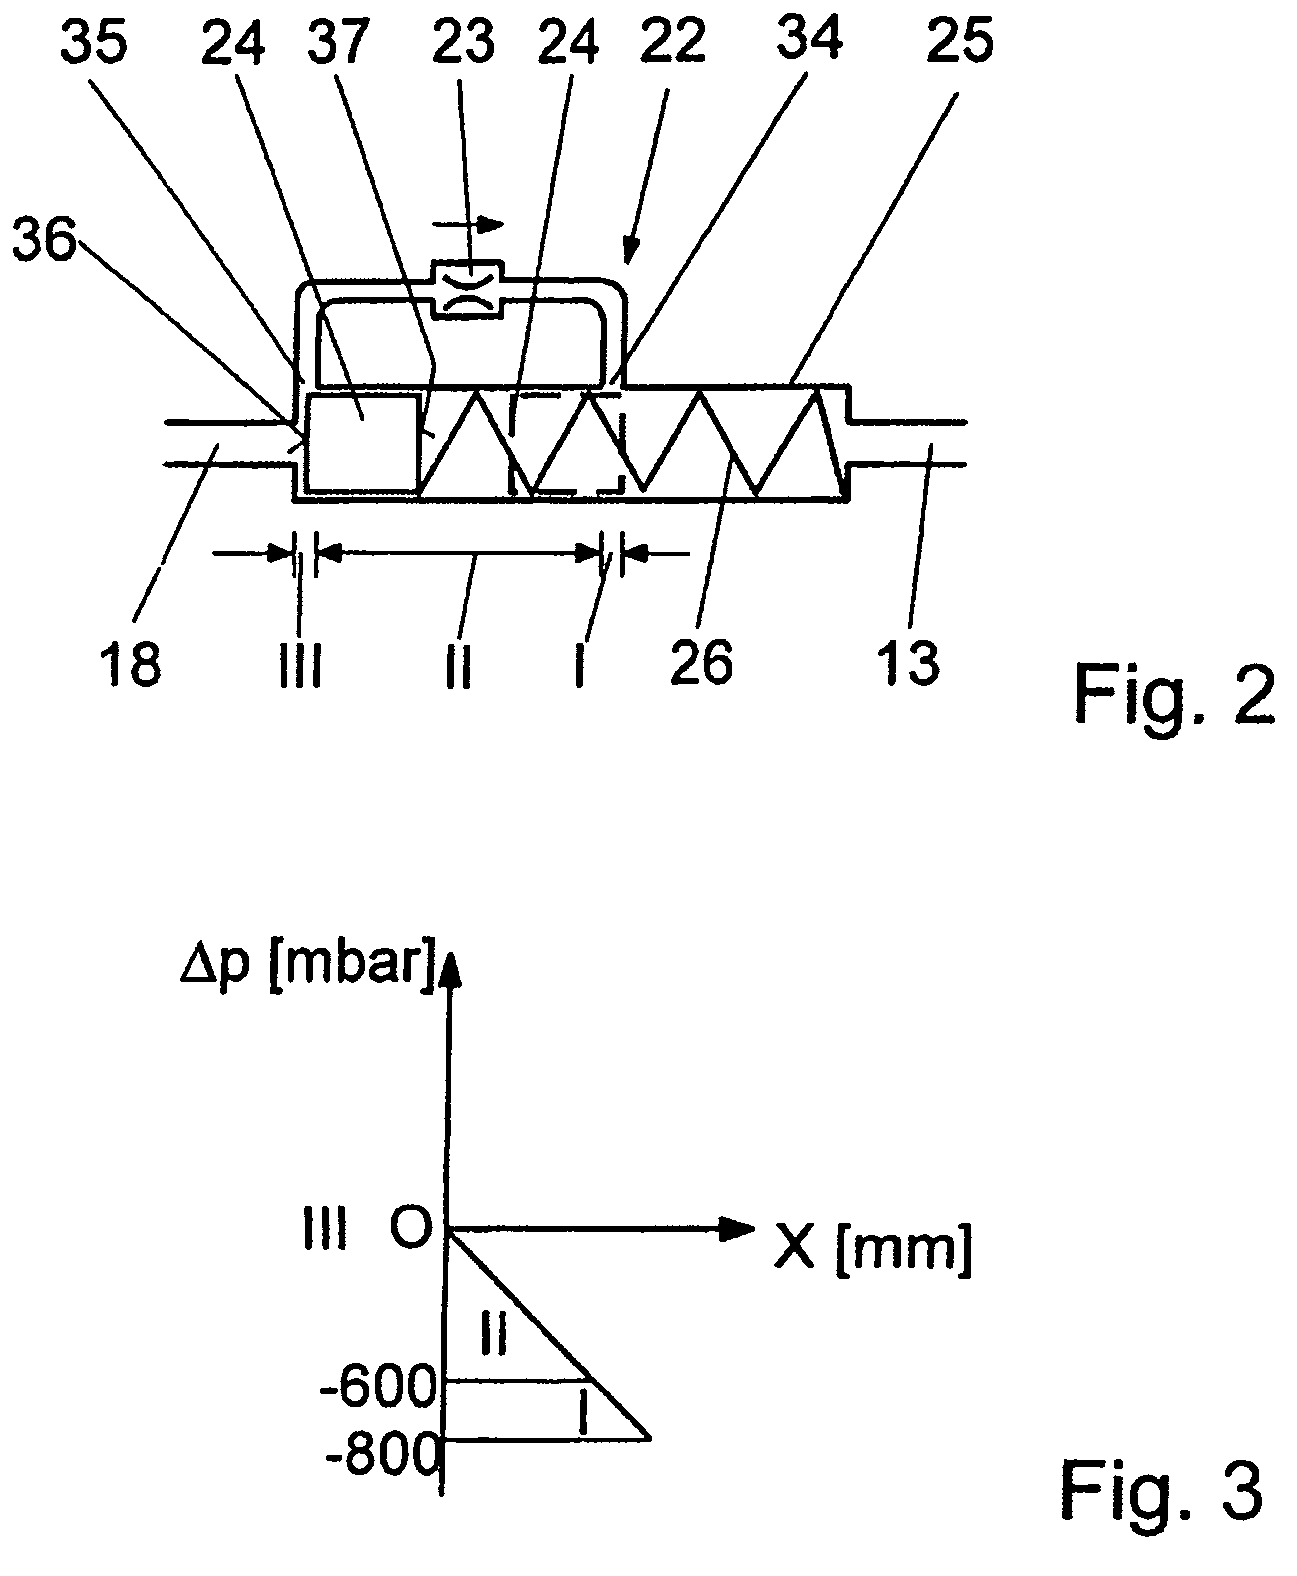 Method and apparatus for venting a crankcase of an internal combustion engine